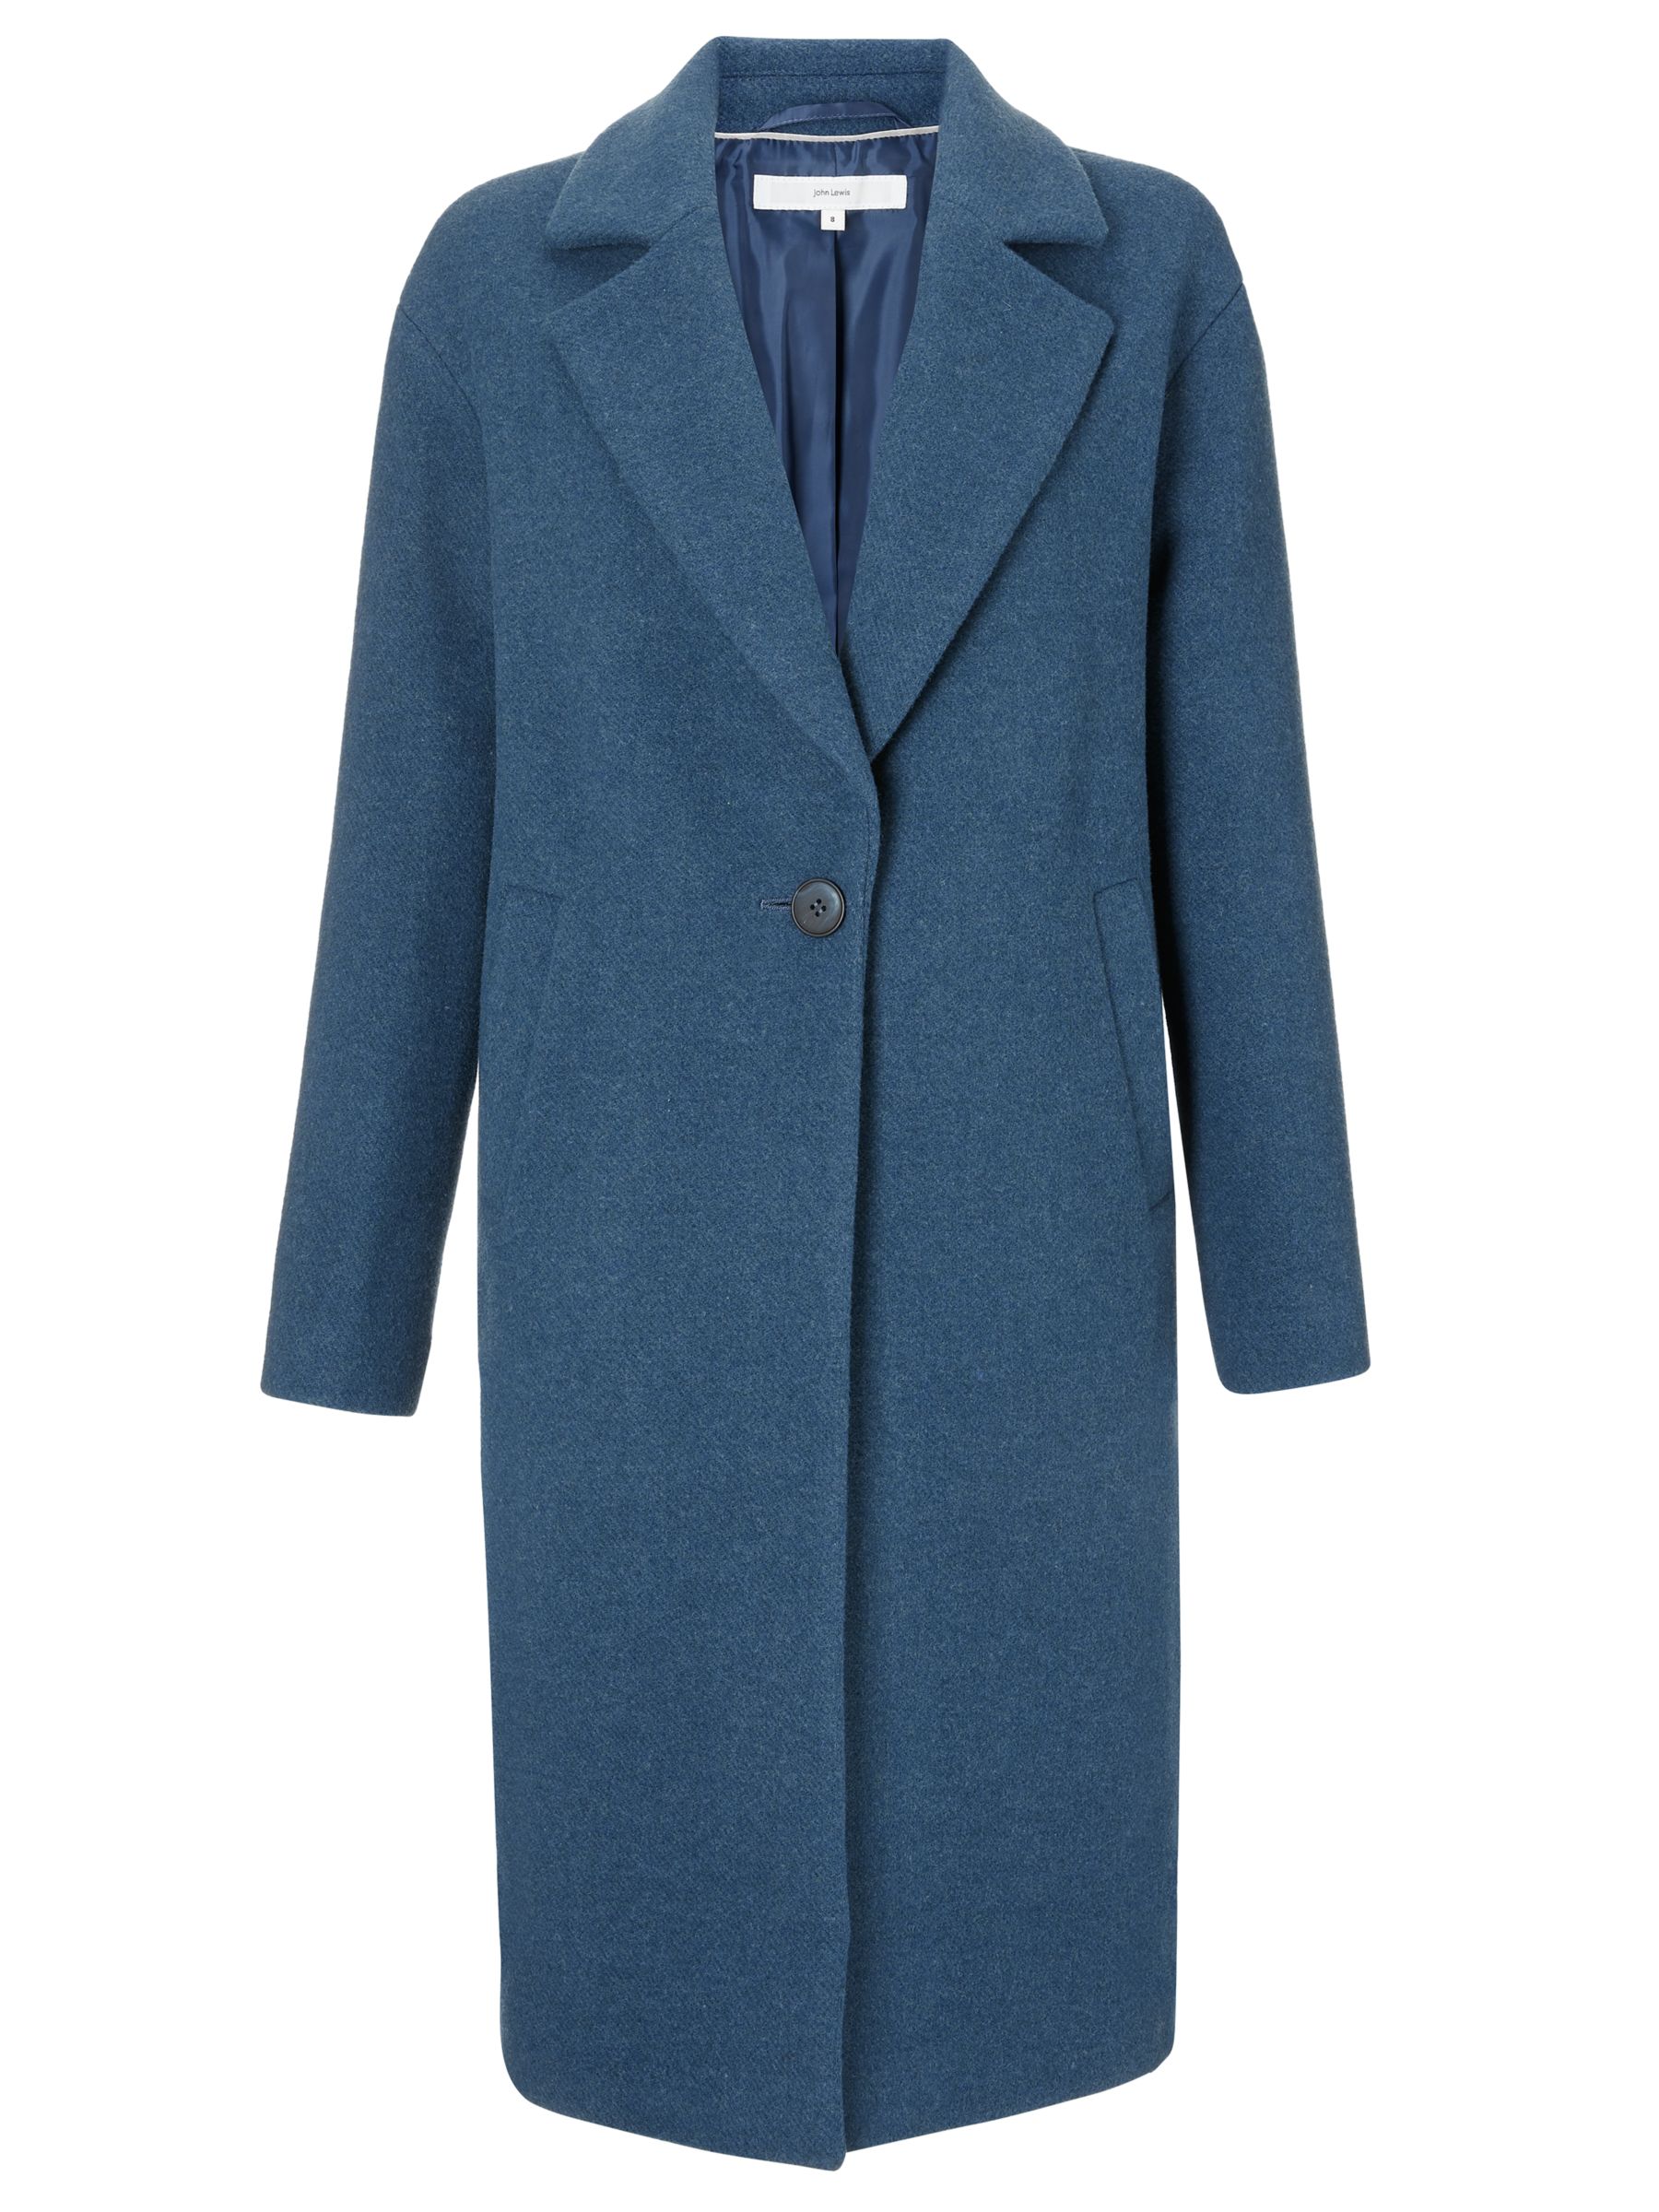 AND/OR Relaxed Single Breasted Midi Coat, Blue